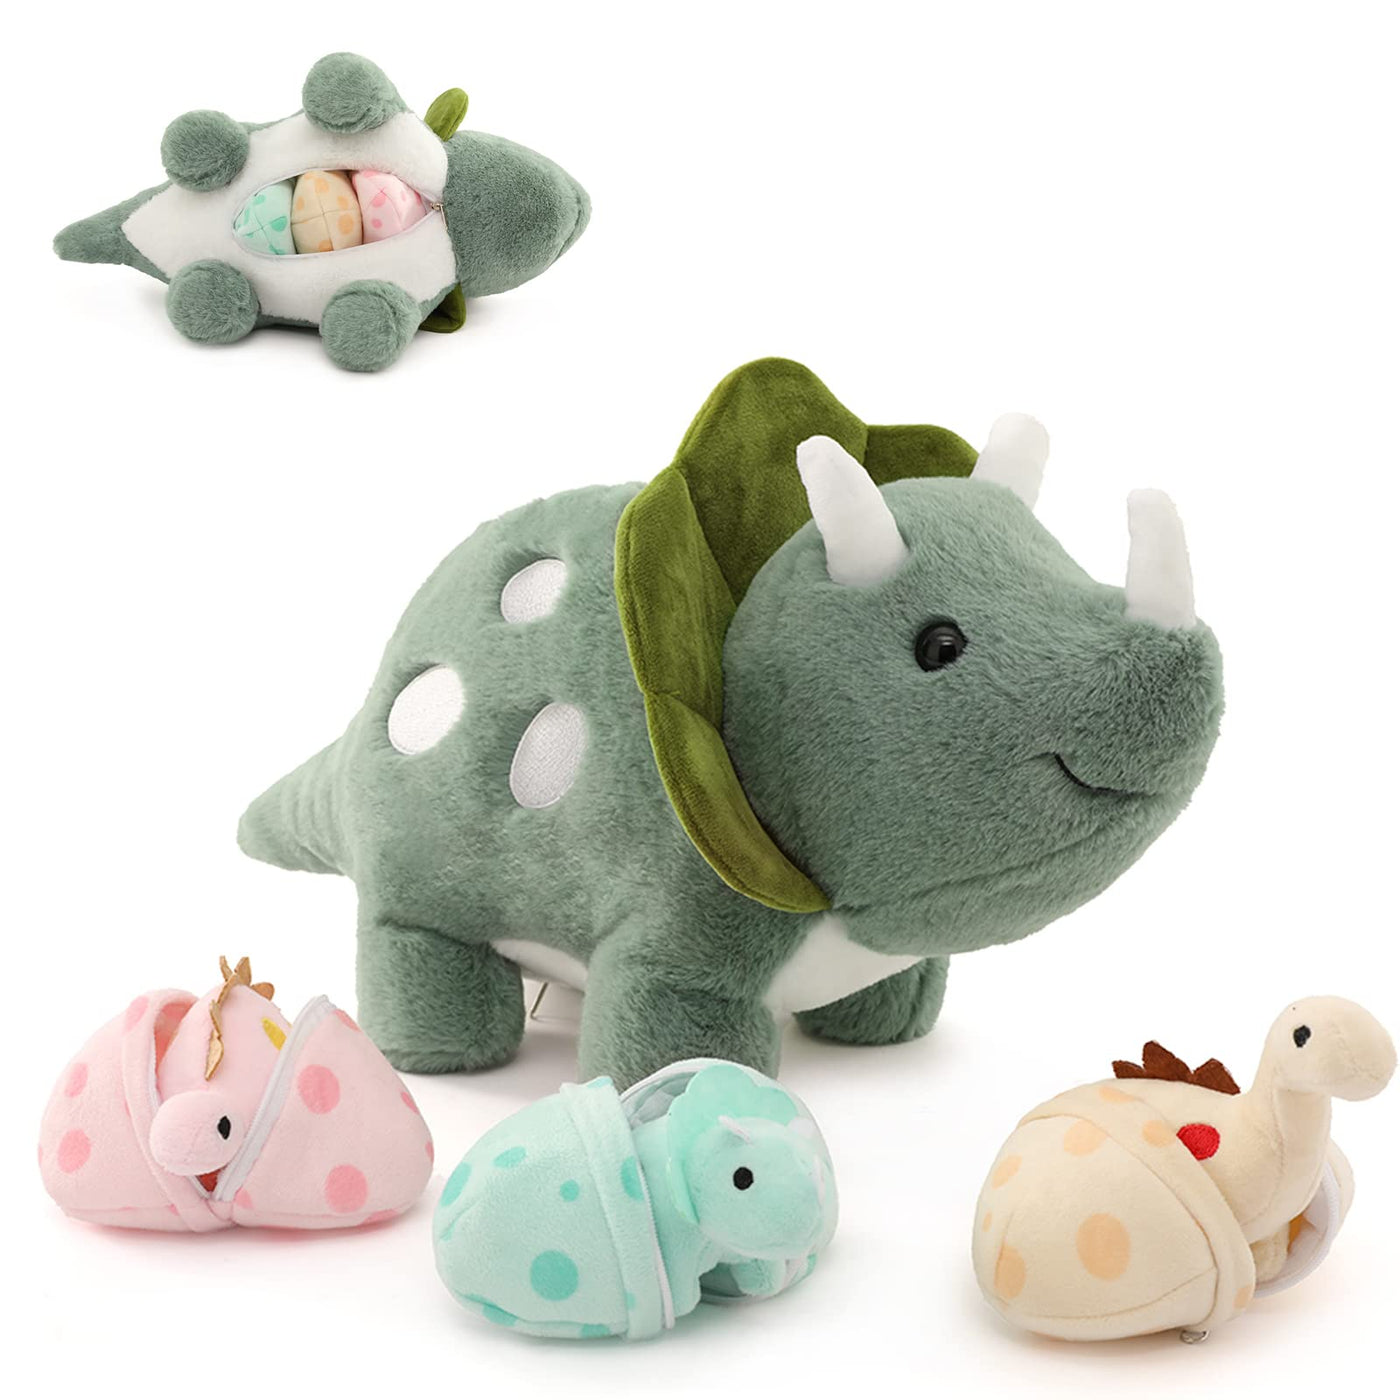 Dinosaur Plush Toy with 3 Baby Dinosaurs, 17.6 Inches